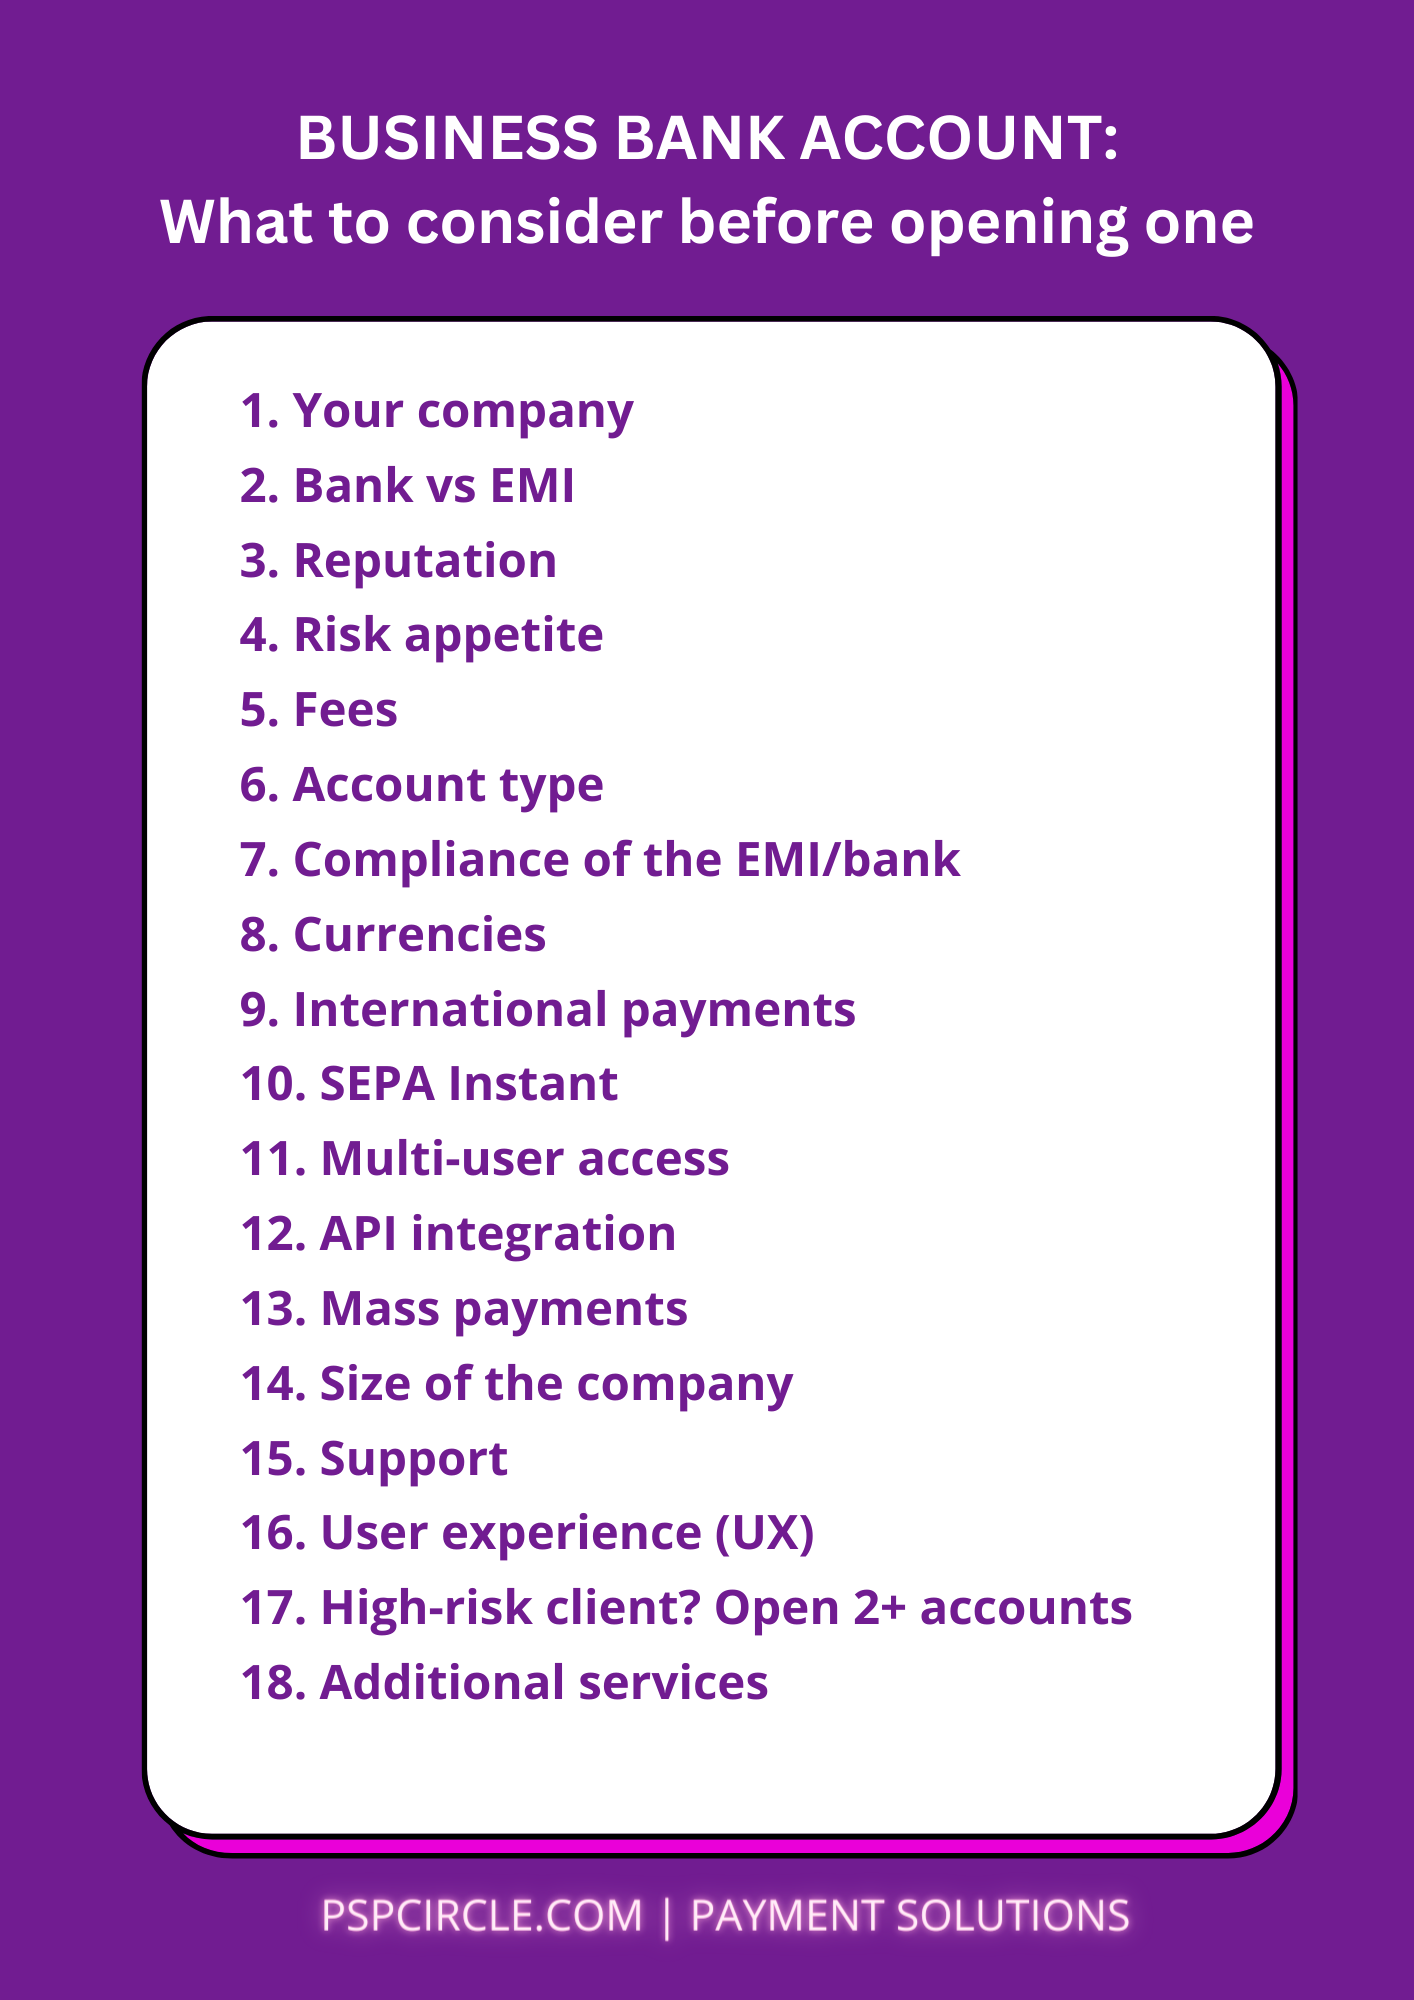 Business bank account: What to consider before opening one. By PSP Circle